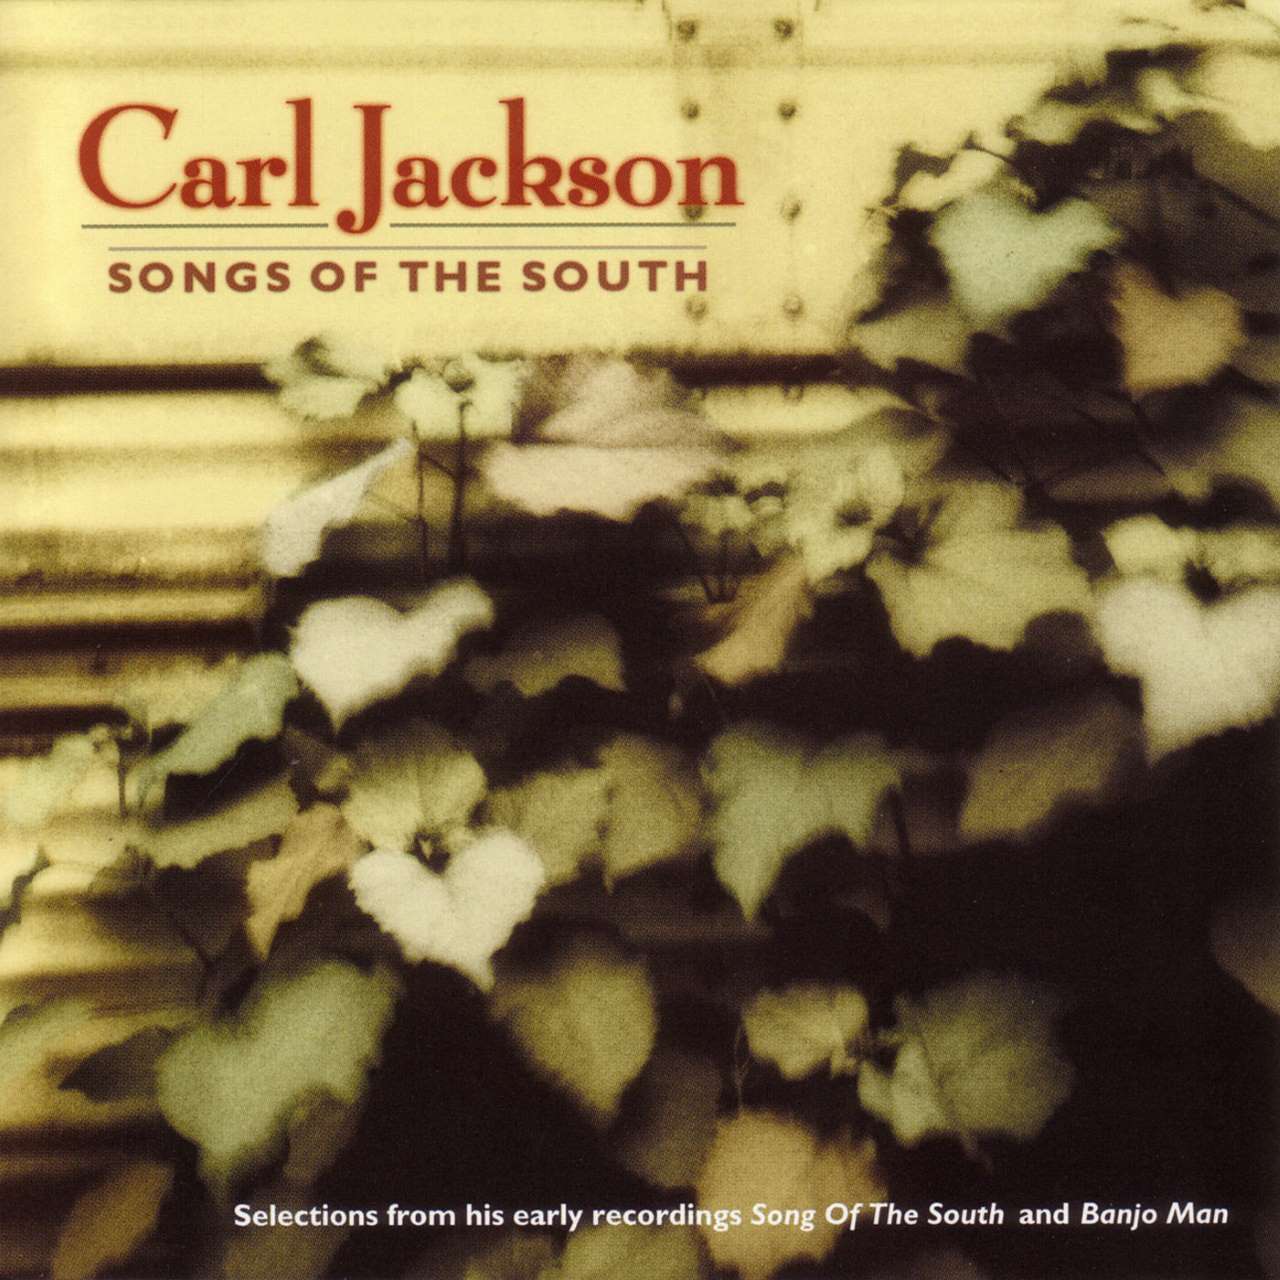 Carl Jackson - Songs Of The South cover album